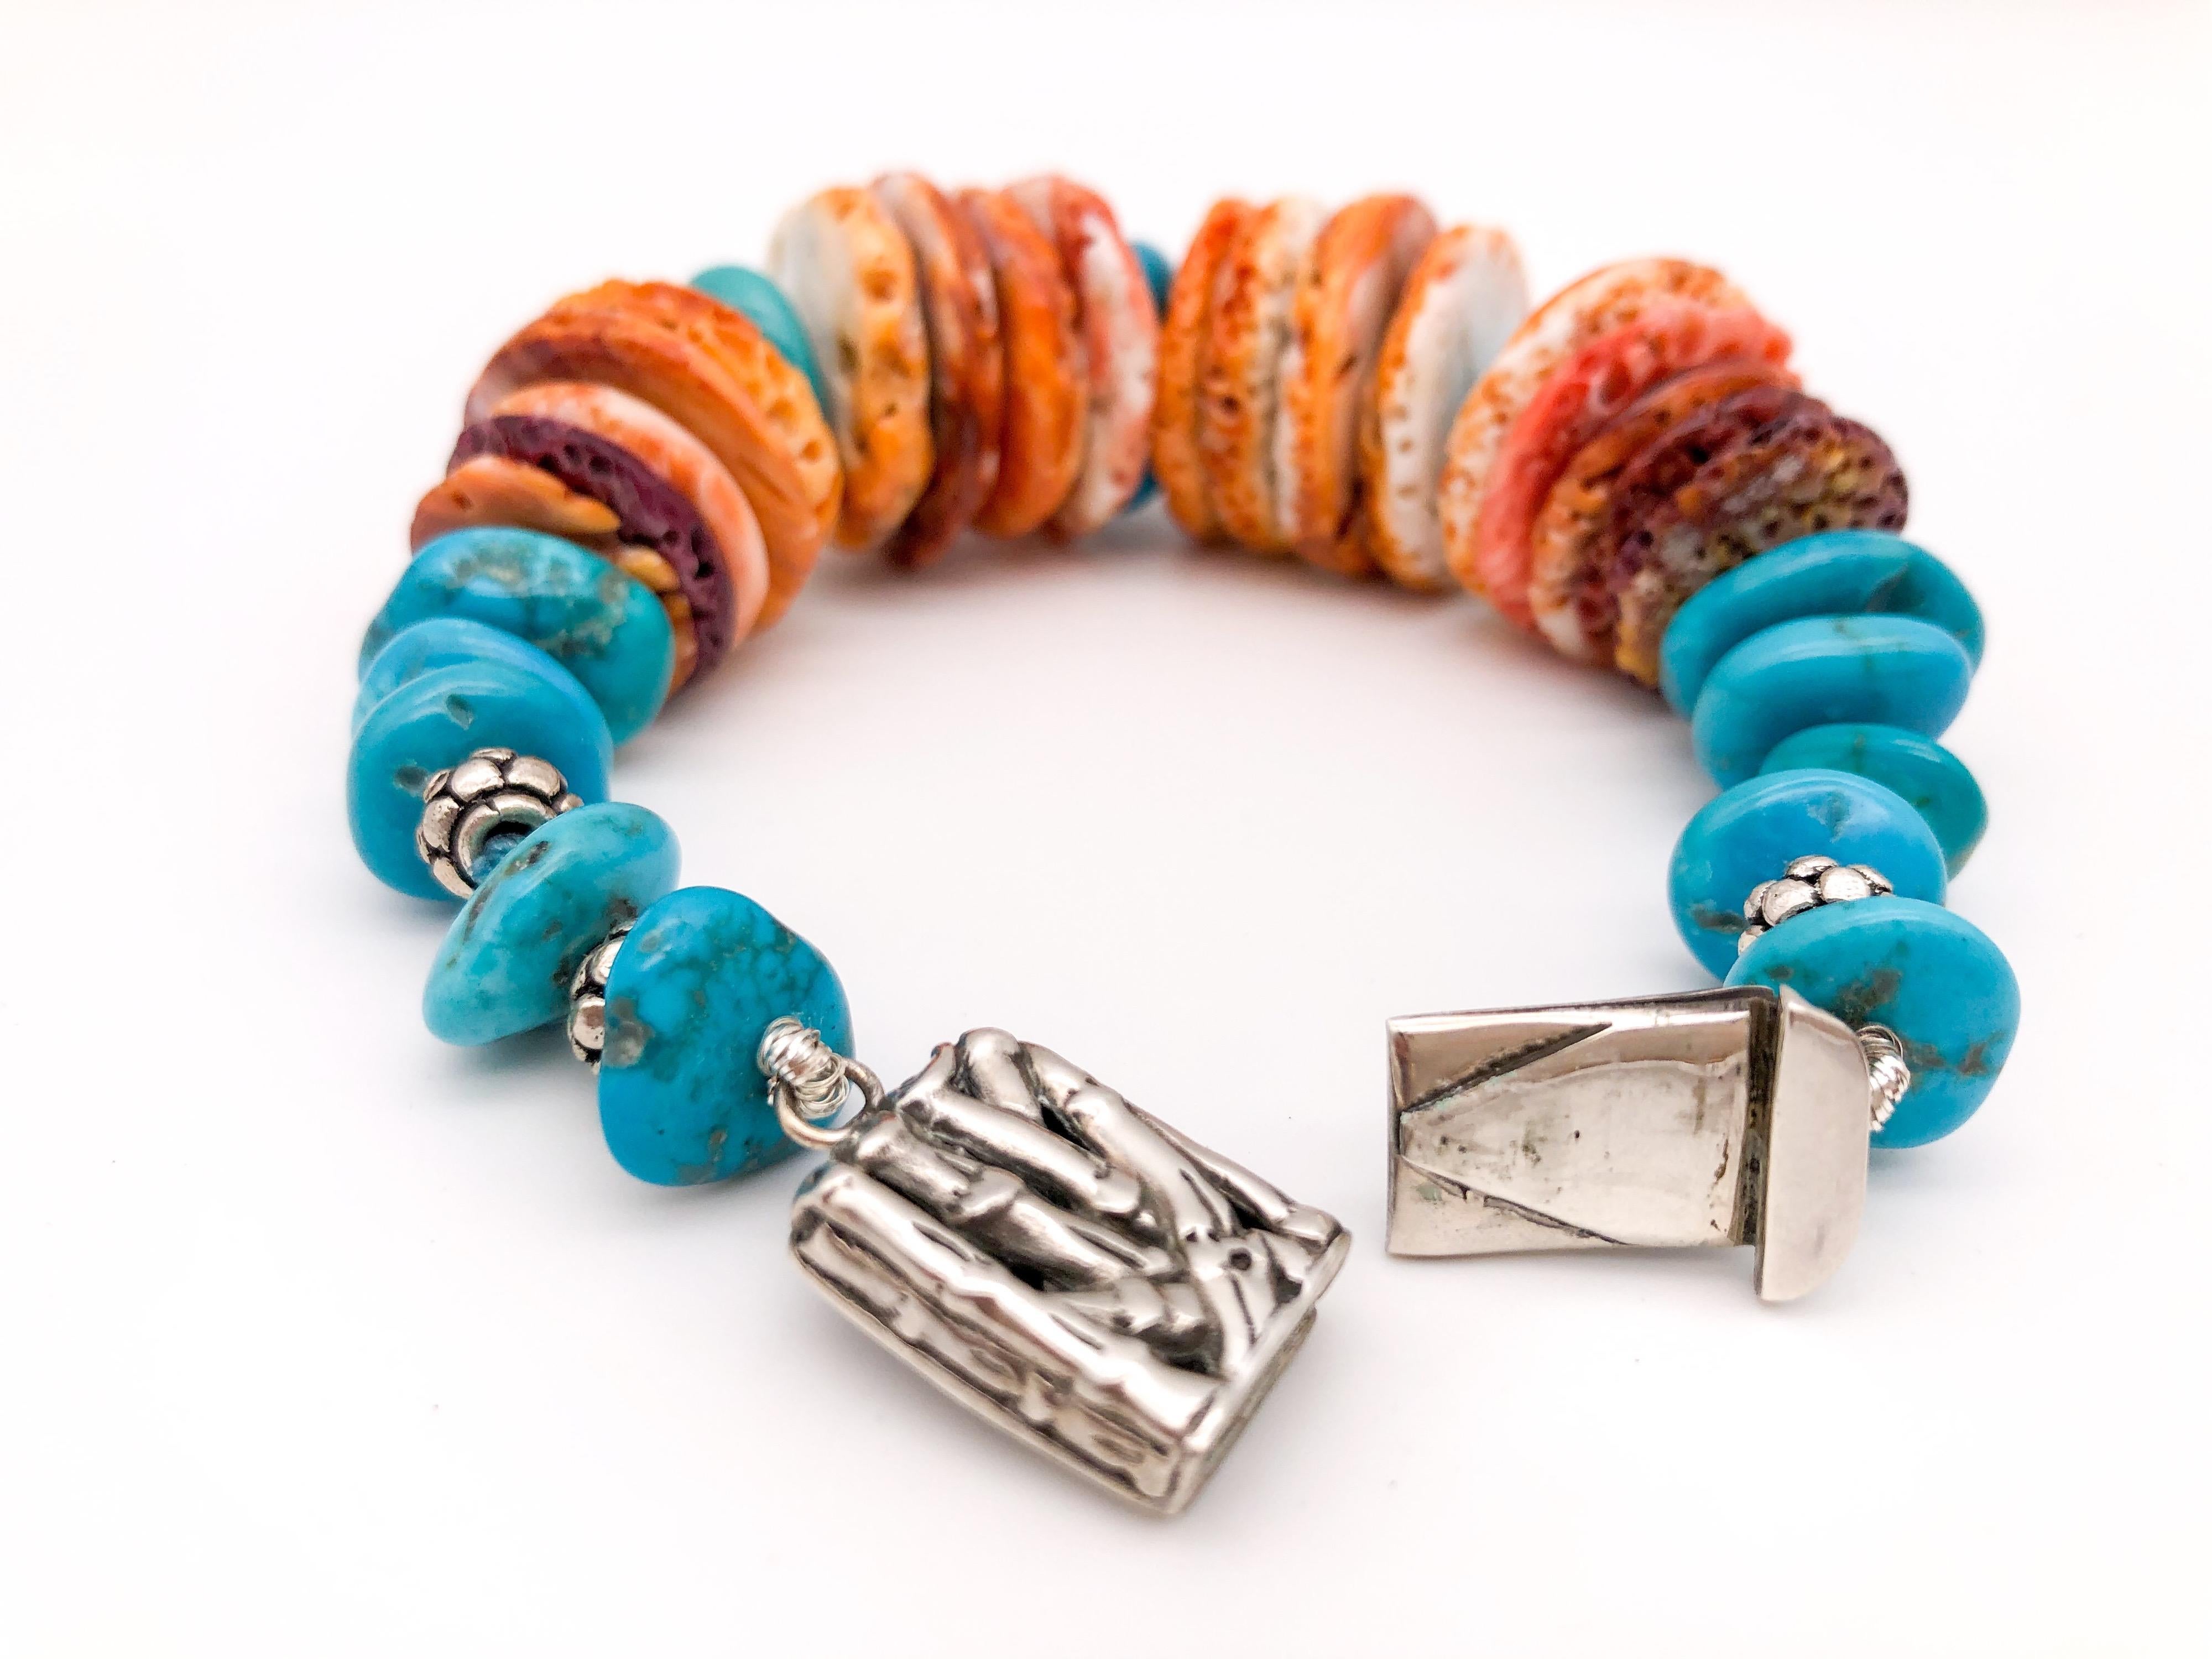 One-of-a-Kind
This round shape Spiny Oyster shell bracelet has been tastefully designed with a splash of Turquoise spacers and a Sterling Silver clasp. 
Turquoise is the birthstone of December. It is believed that turquoise tends to bring good